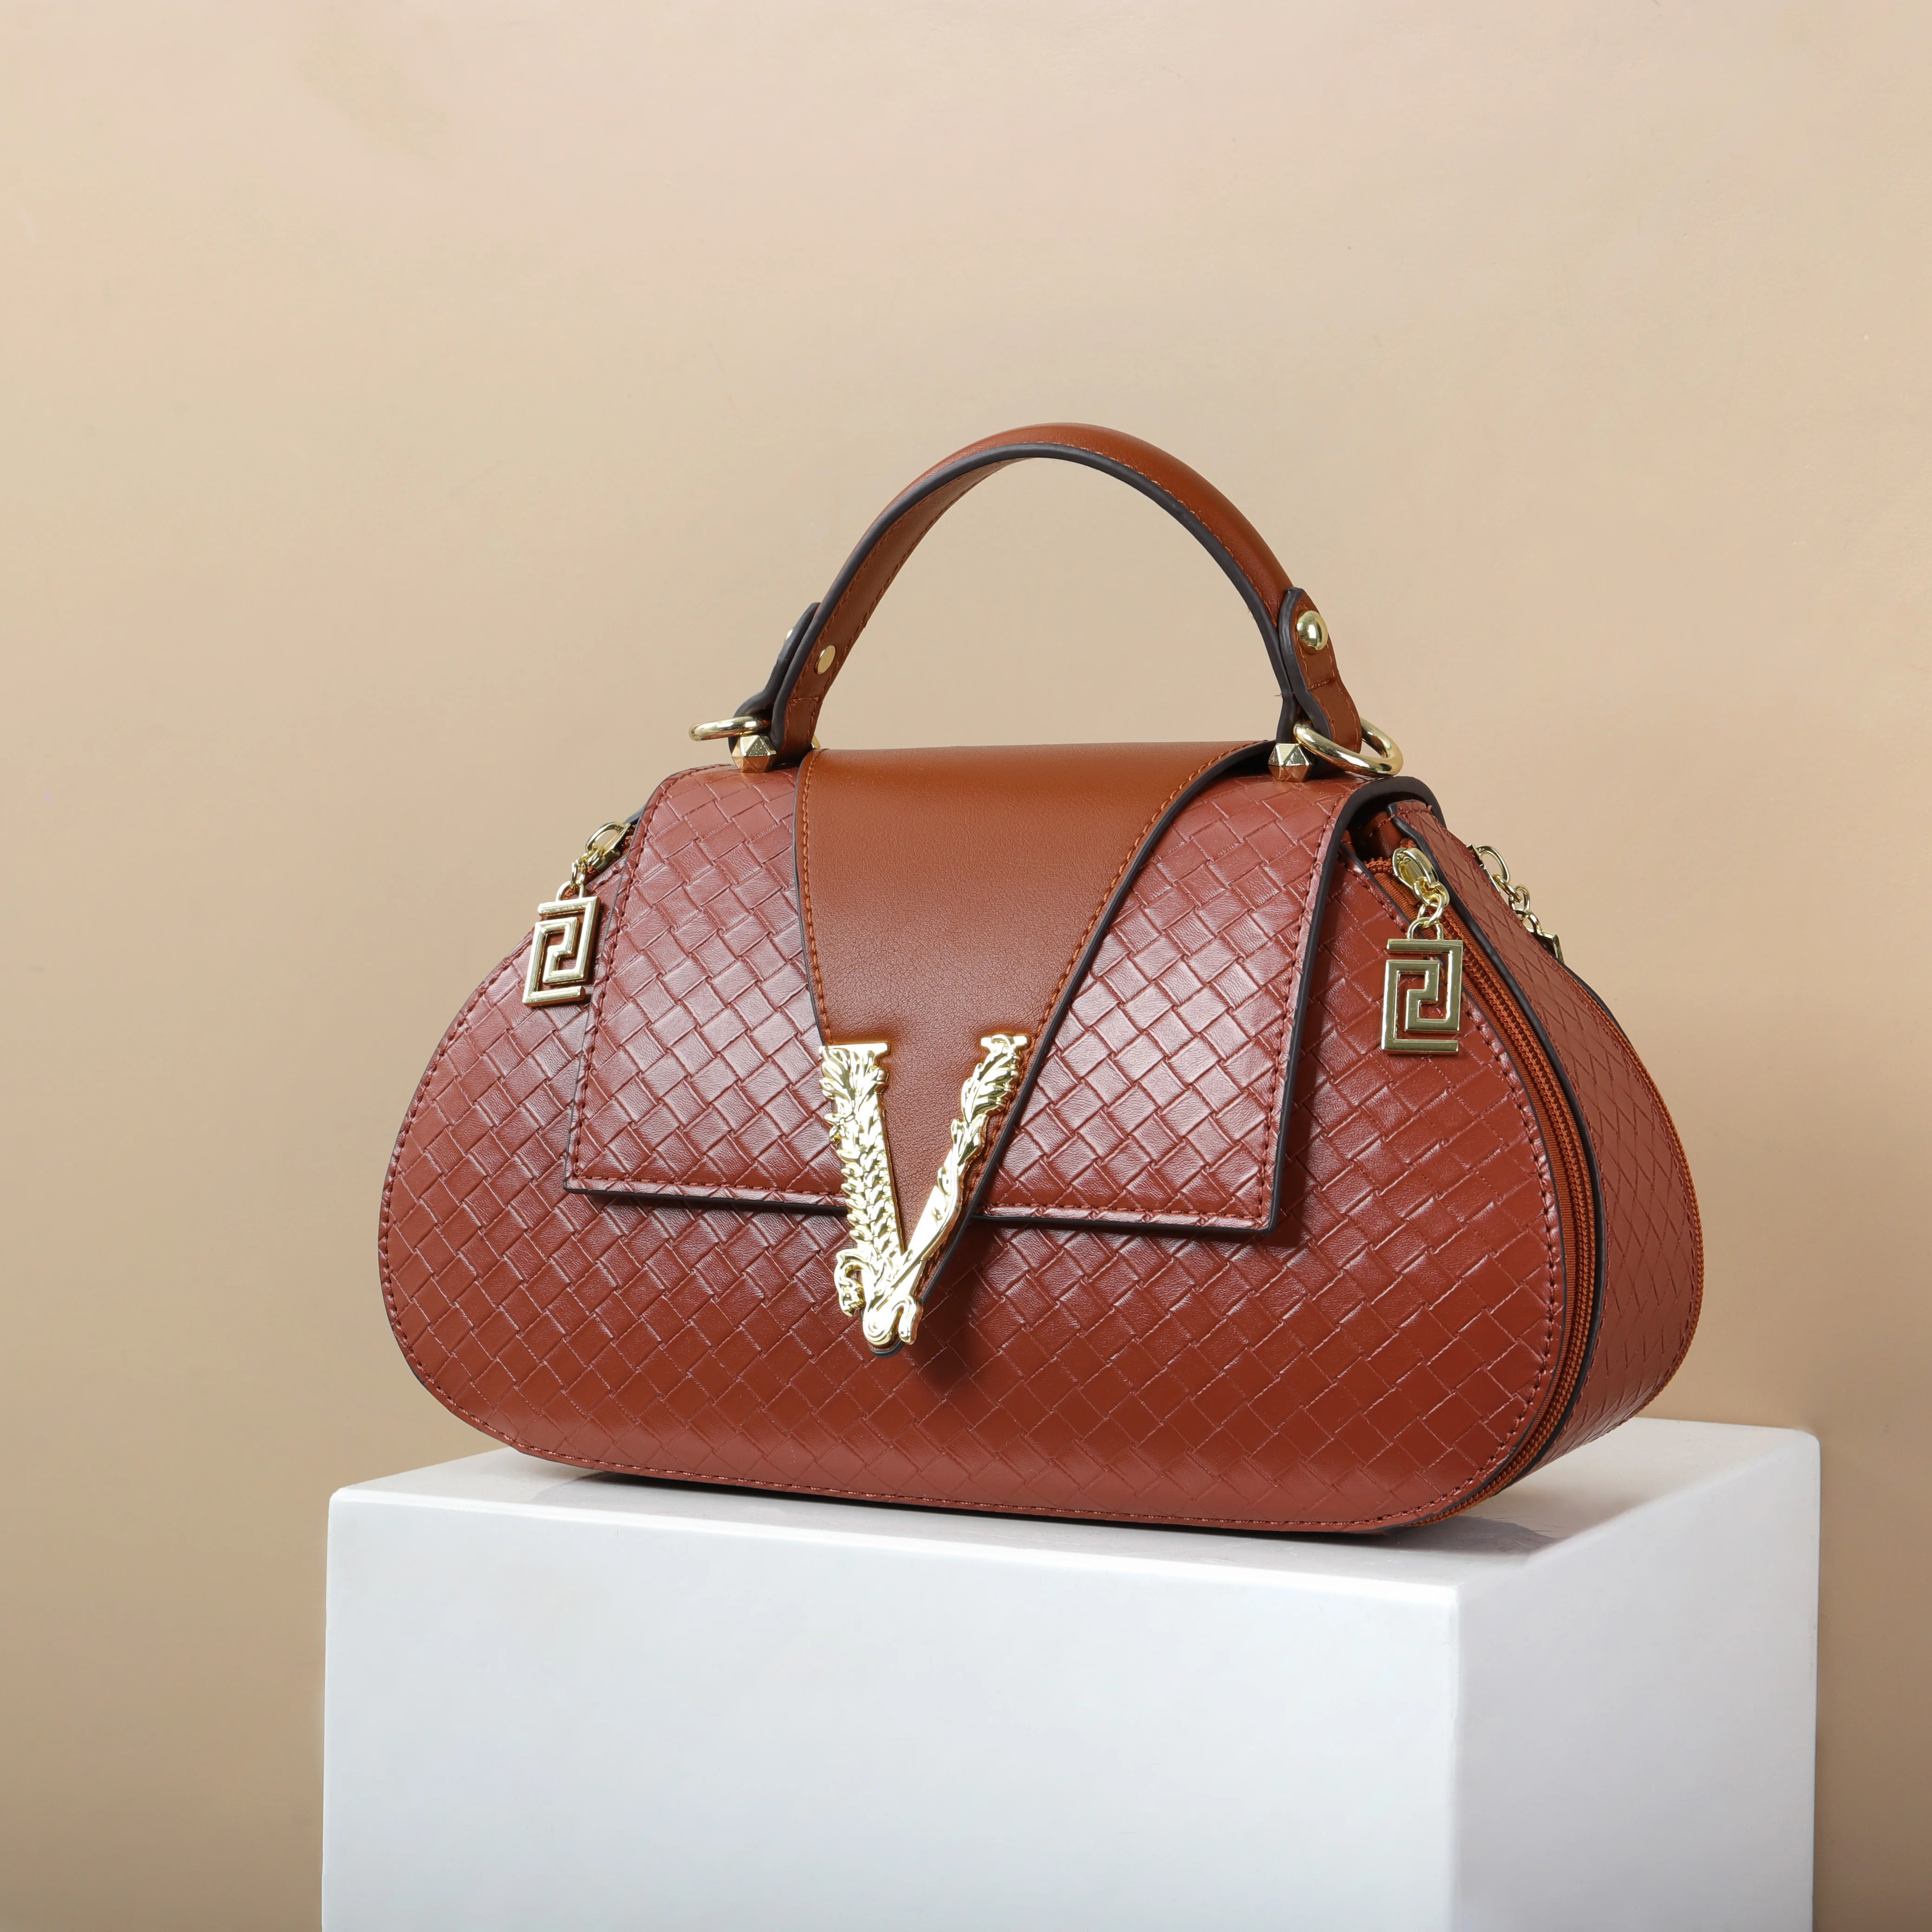 Wholesale hot selling handbags for women luxury designer saddle bags for  girls alibaba-online-shopping China ladies bags factory 30 cm From m.alibaba .com